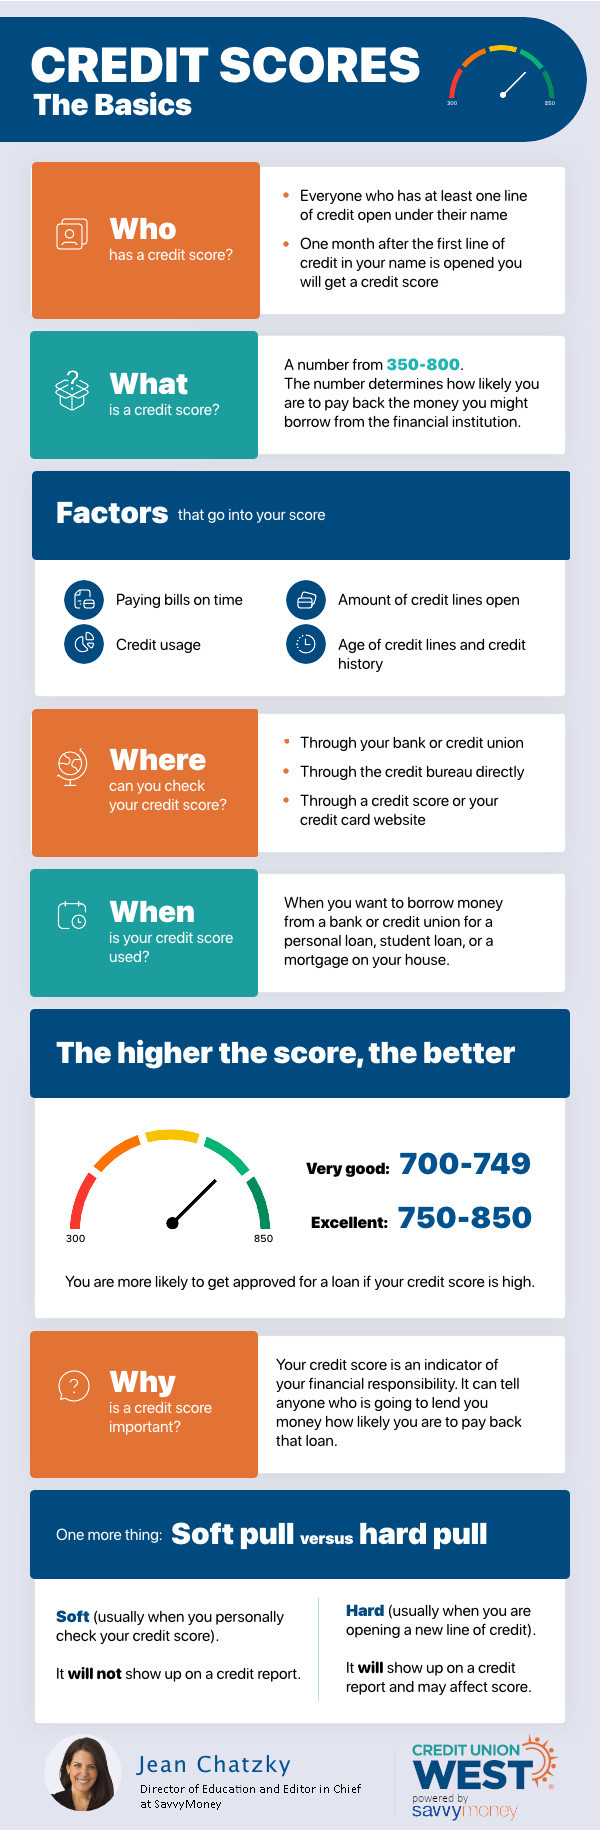 Credit Scores, the basics. An infographic.